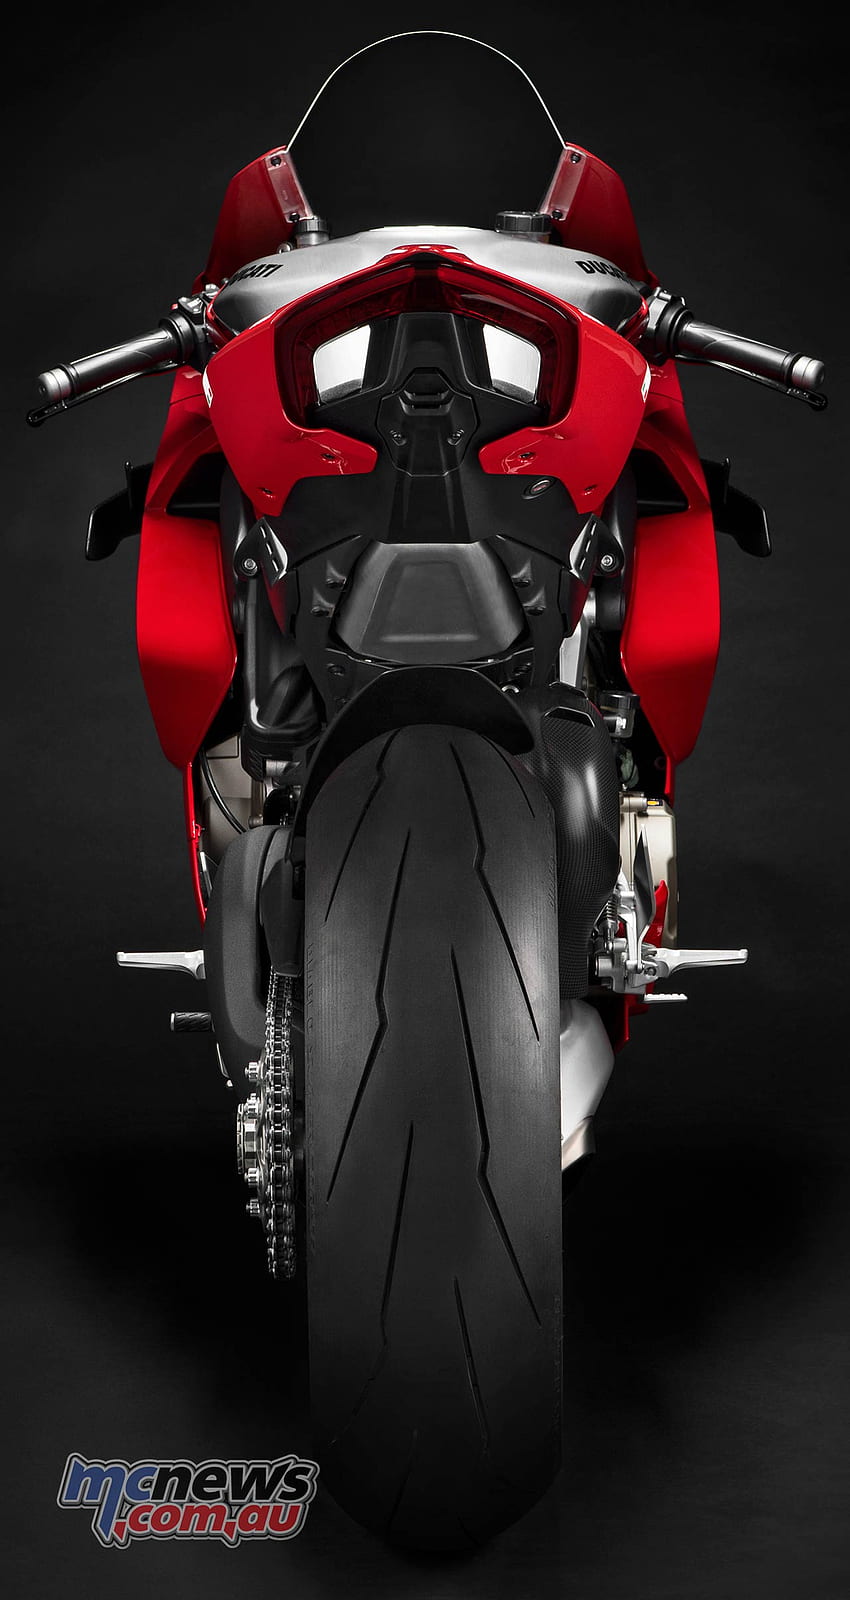 Ducati Panigale V4 R. 998cc racer. More tech details!. Motorcycle News, Sport and Reviews, Ducati V4R HD phone wallpaper